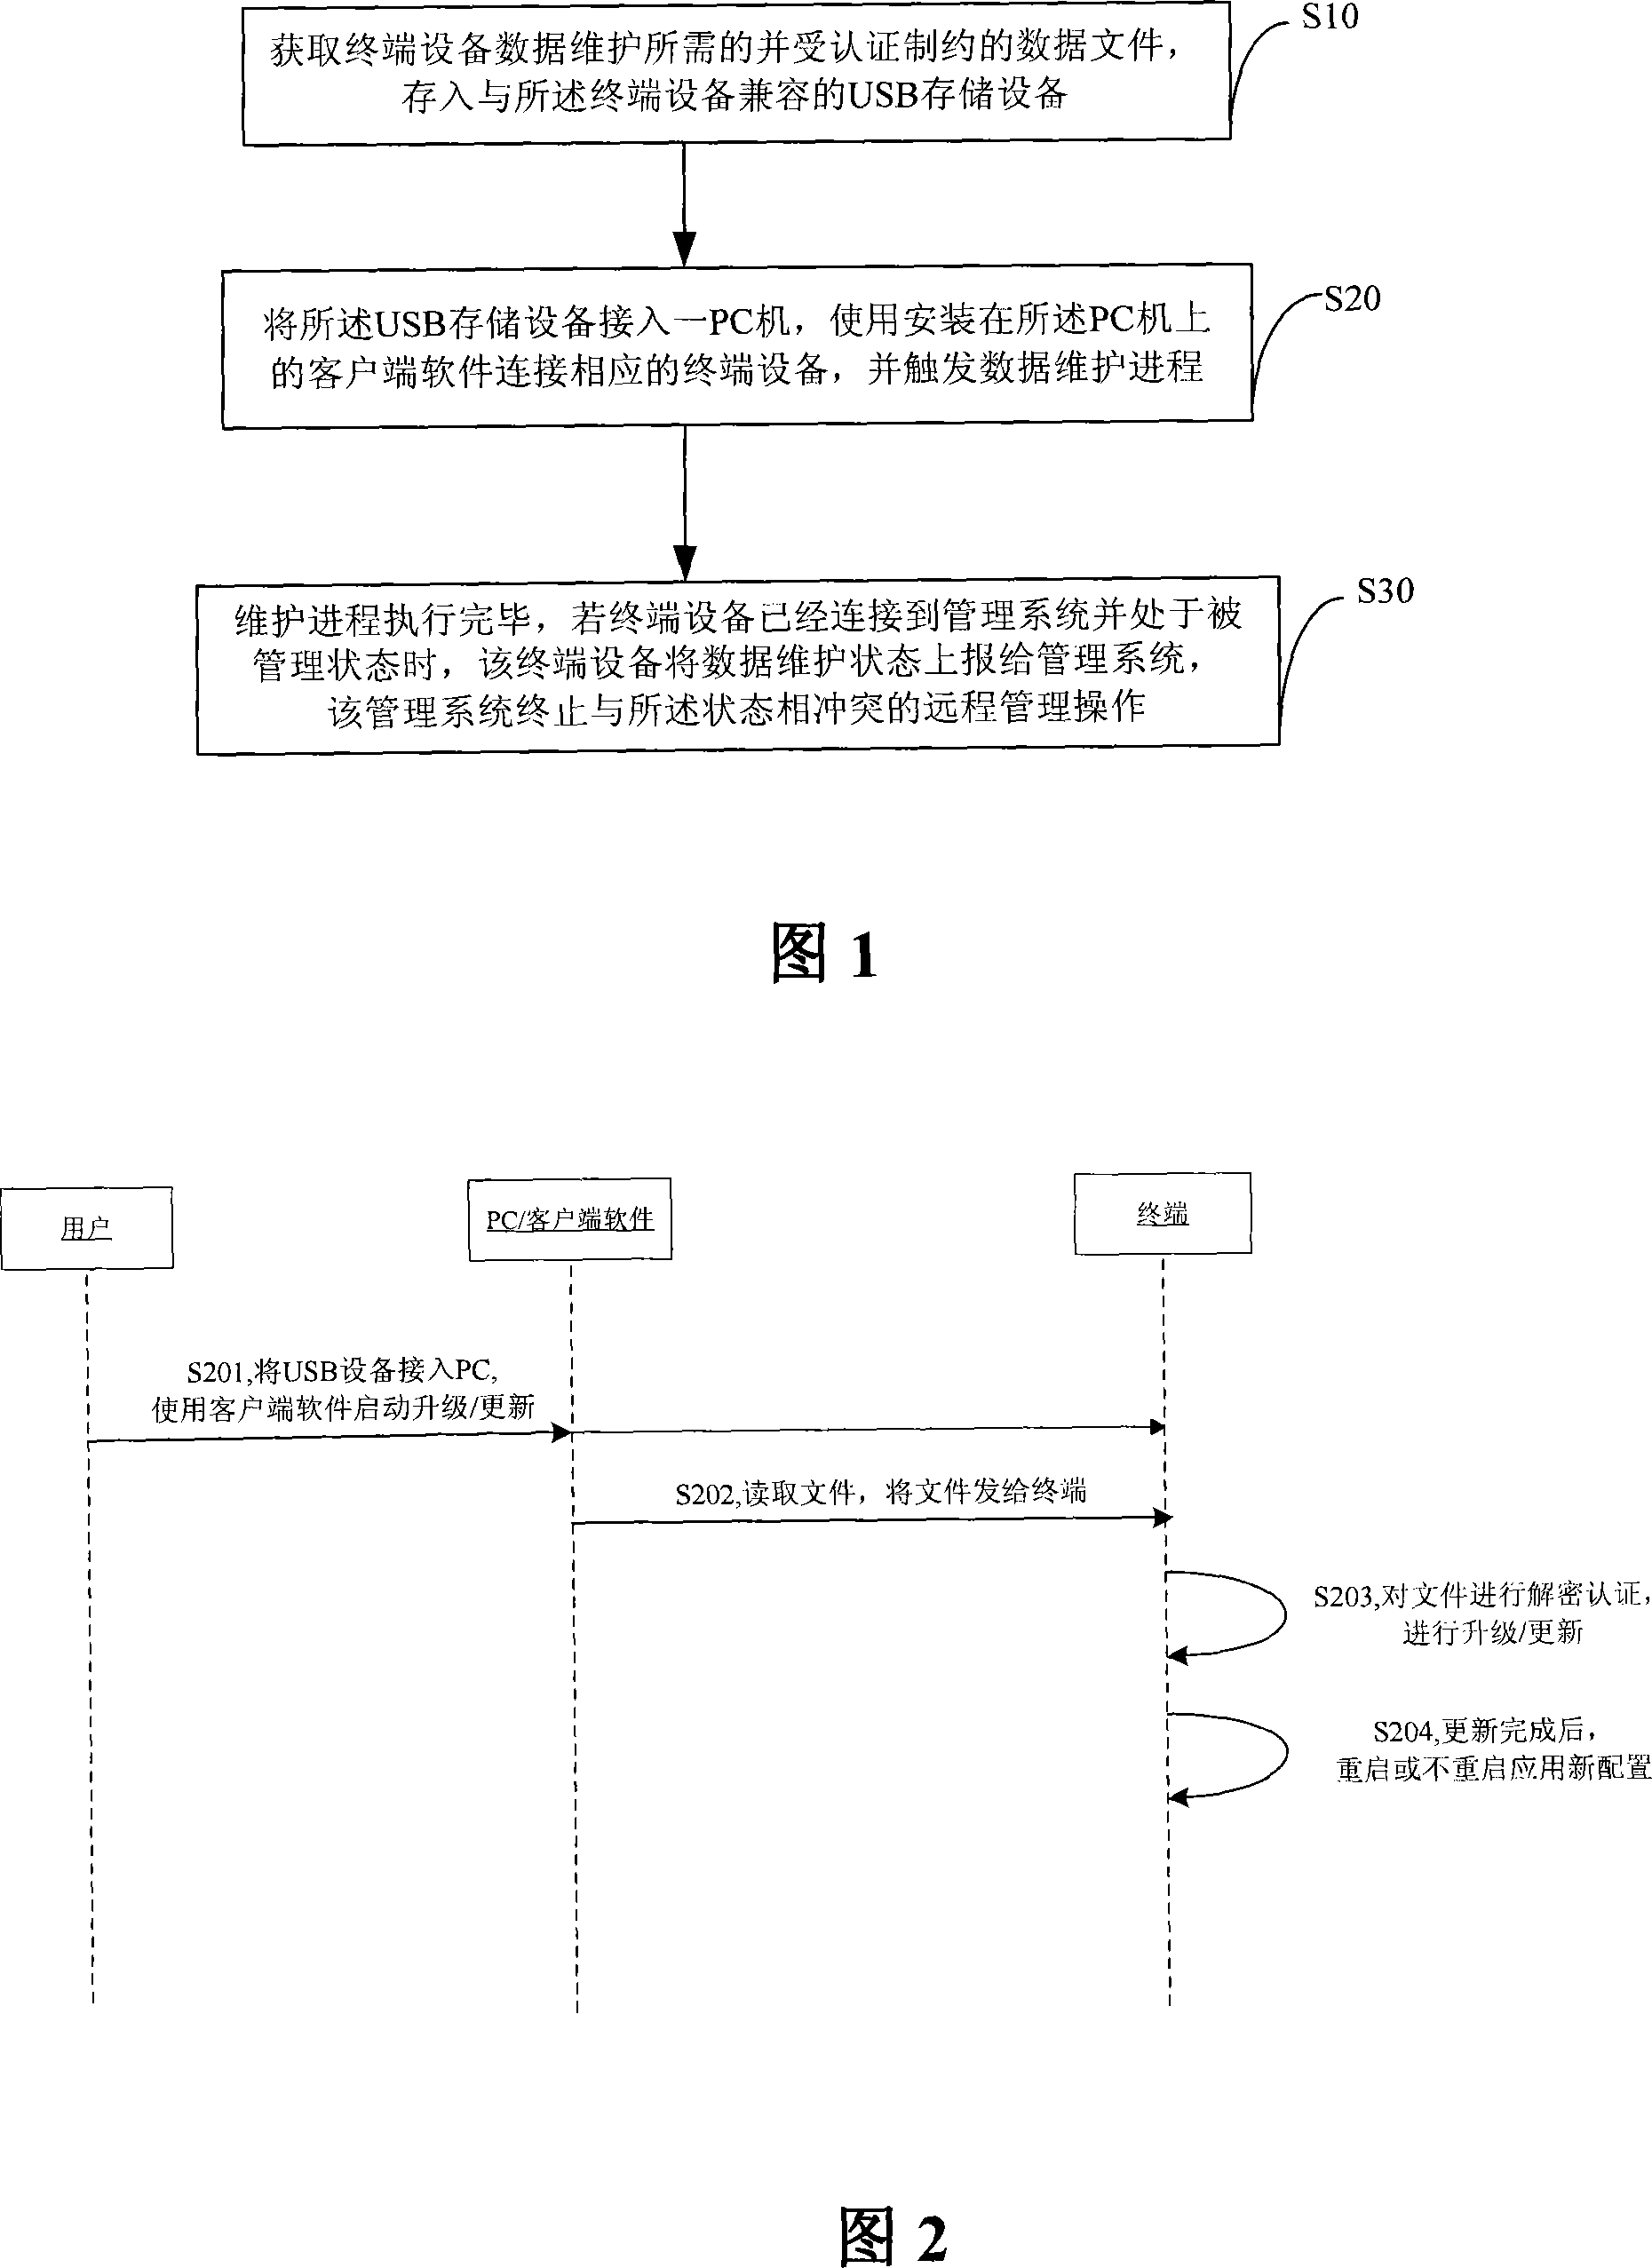 Method for implementing terminal unit data maintenance by client terminal software